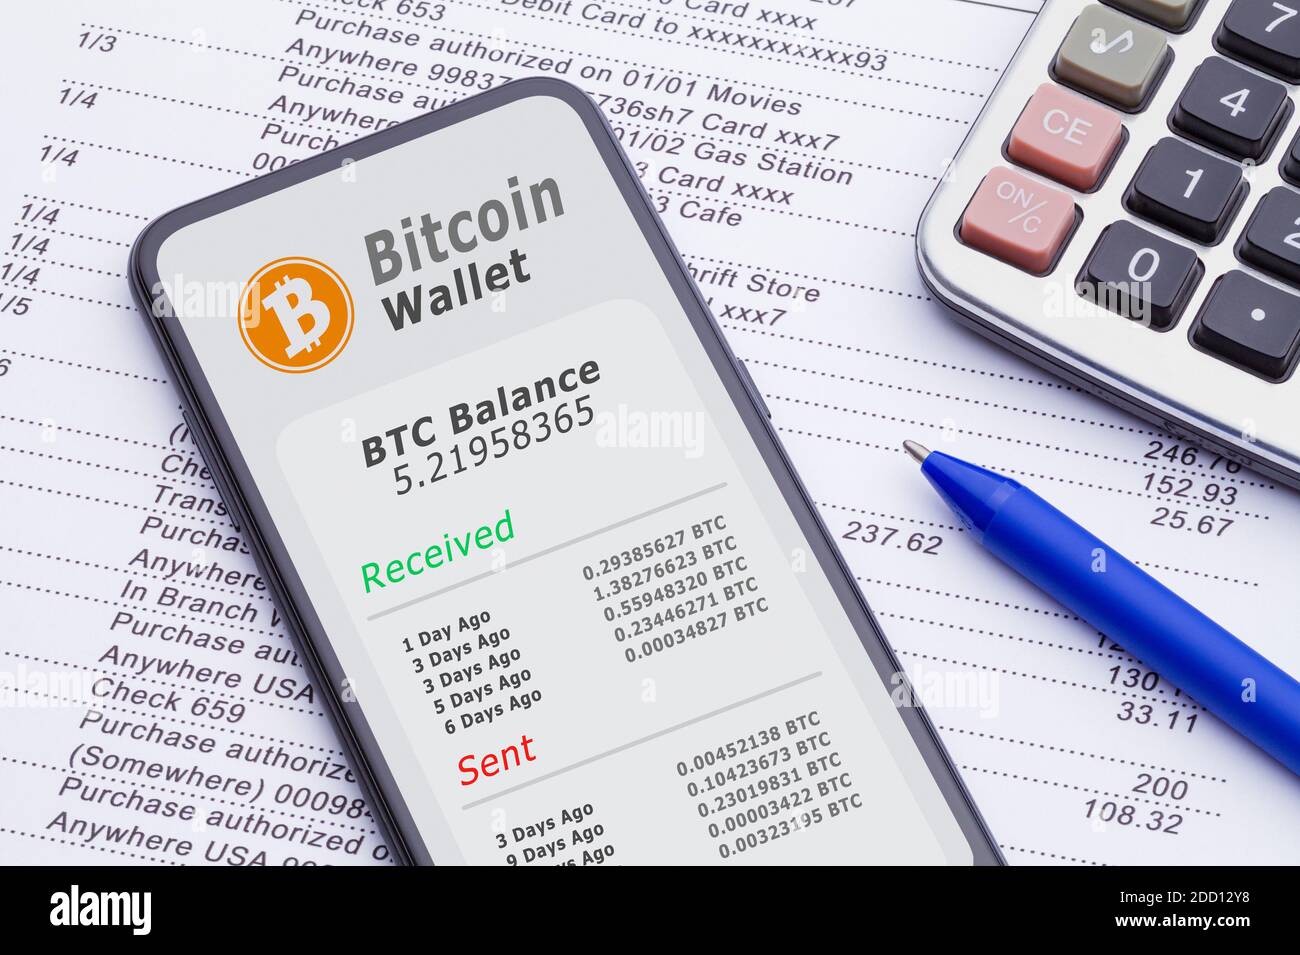 Smart Phone With Bitcoin Wallet on Bank Statement with Calculator and Pen. Stock Photo